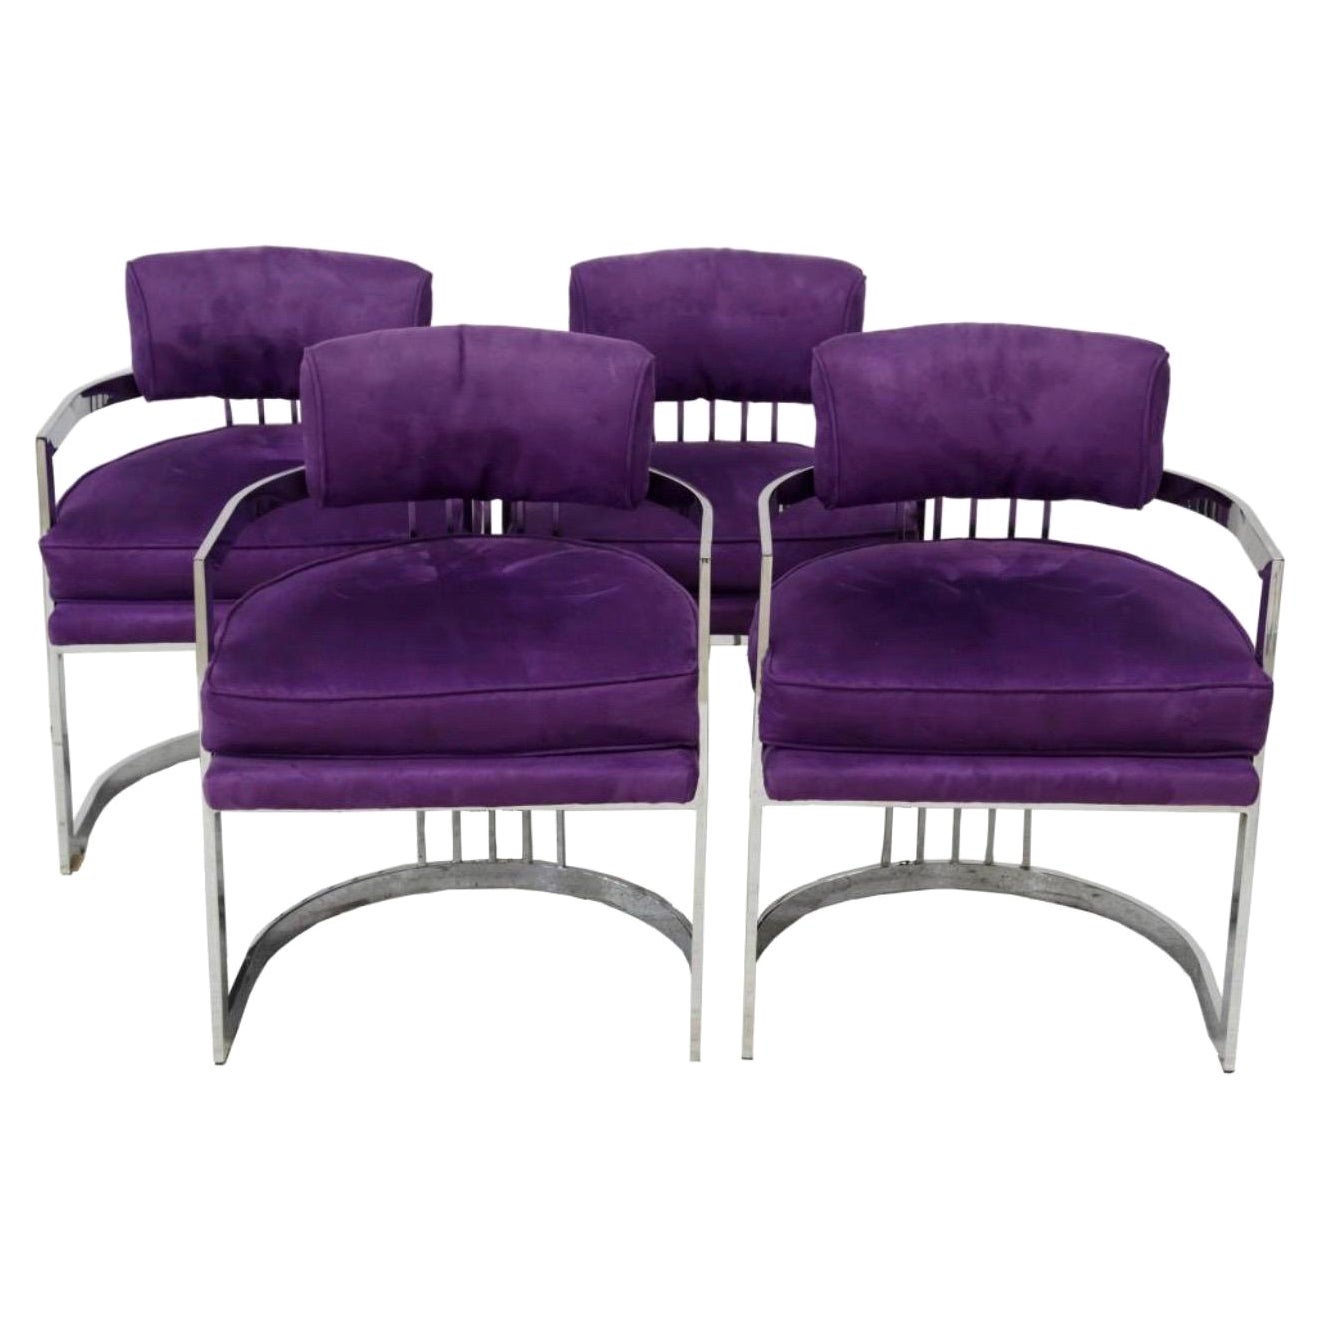 4 Milo Baughman Chrome Chairs in Purple Upholstery  For Sale